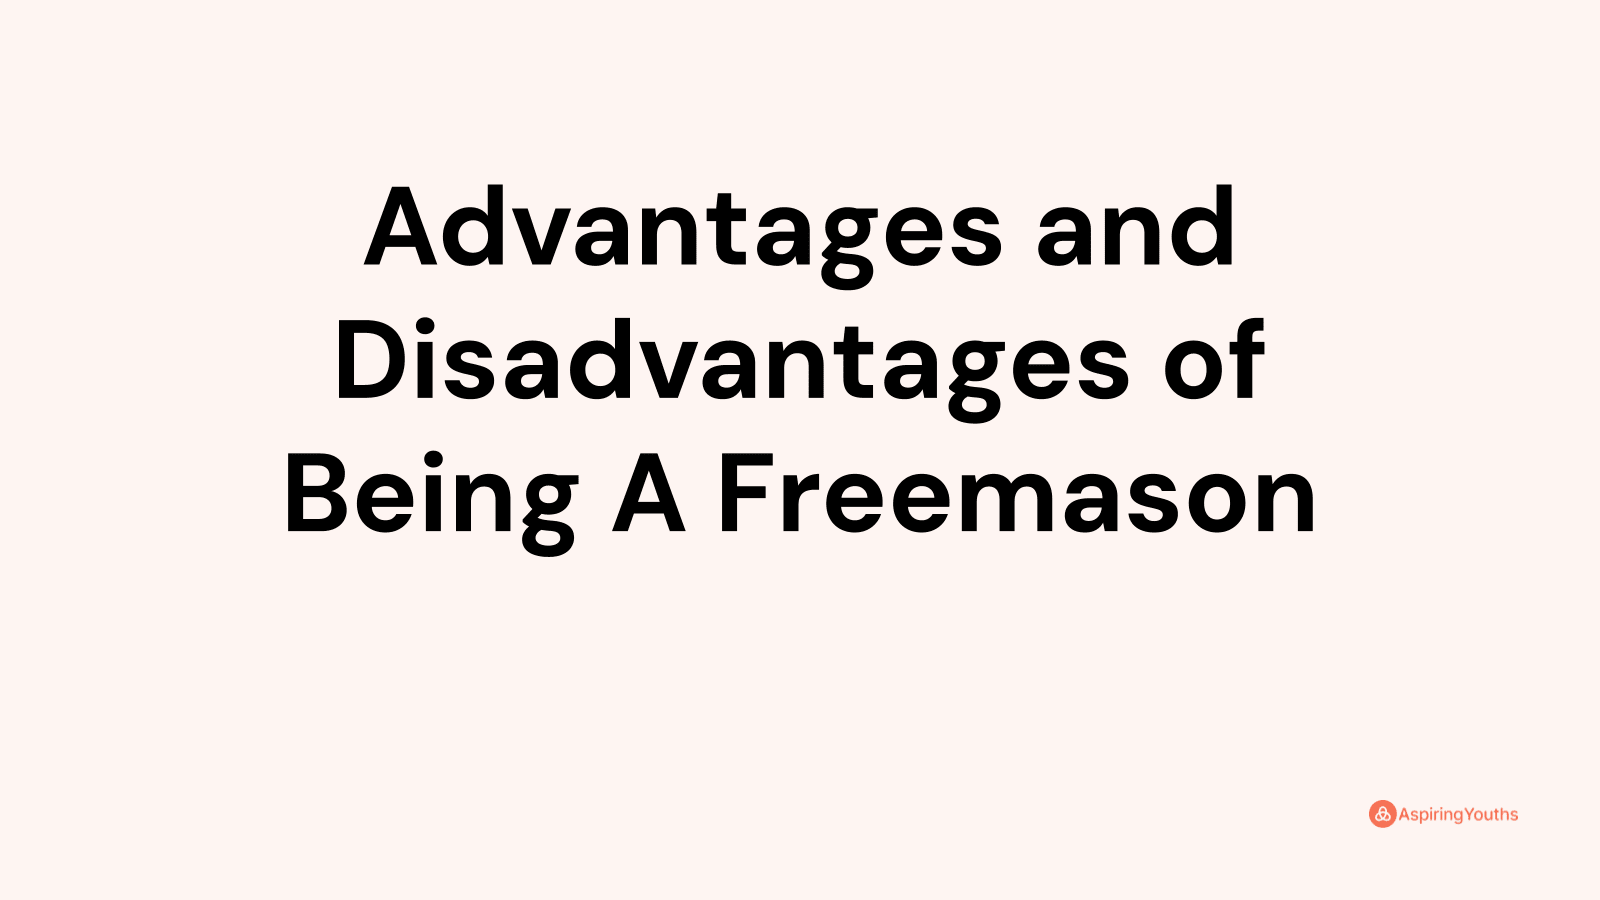 Advantages and disadvantages of Being A Freemason